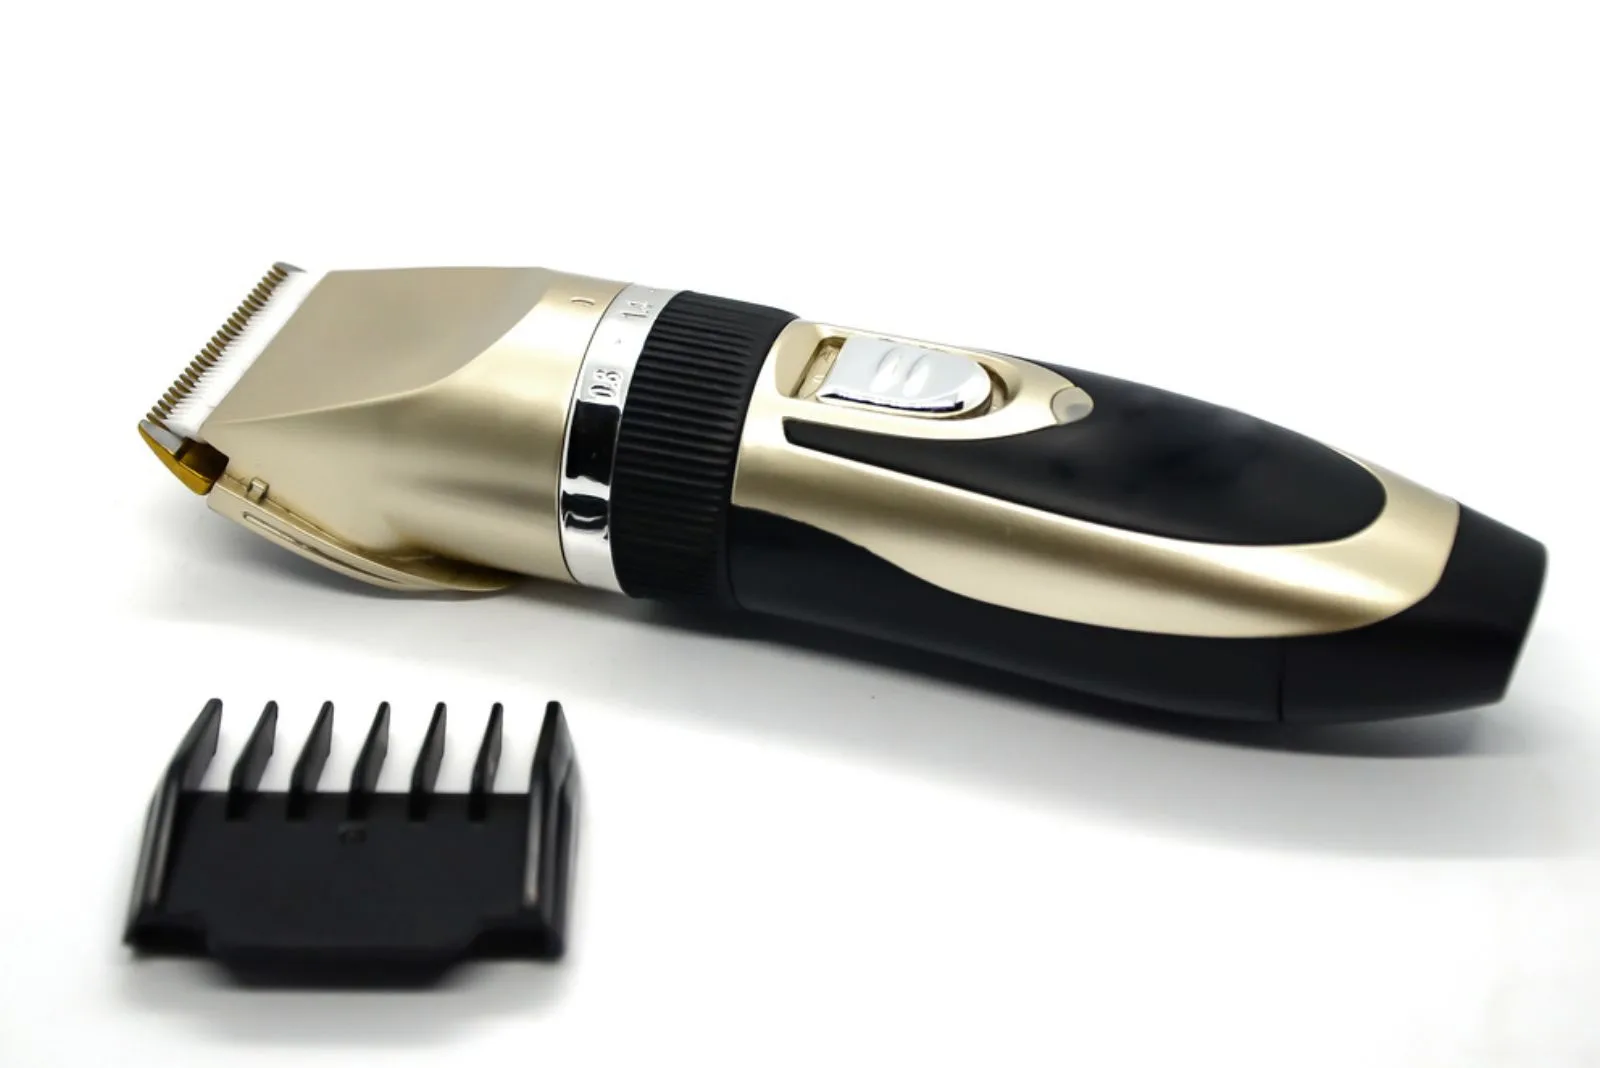 Electric pet clipper with plastic nozzle on a white background